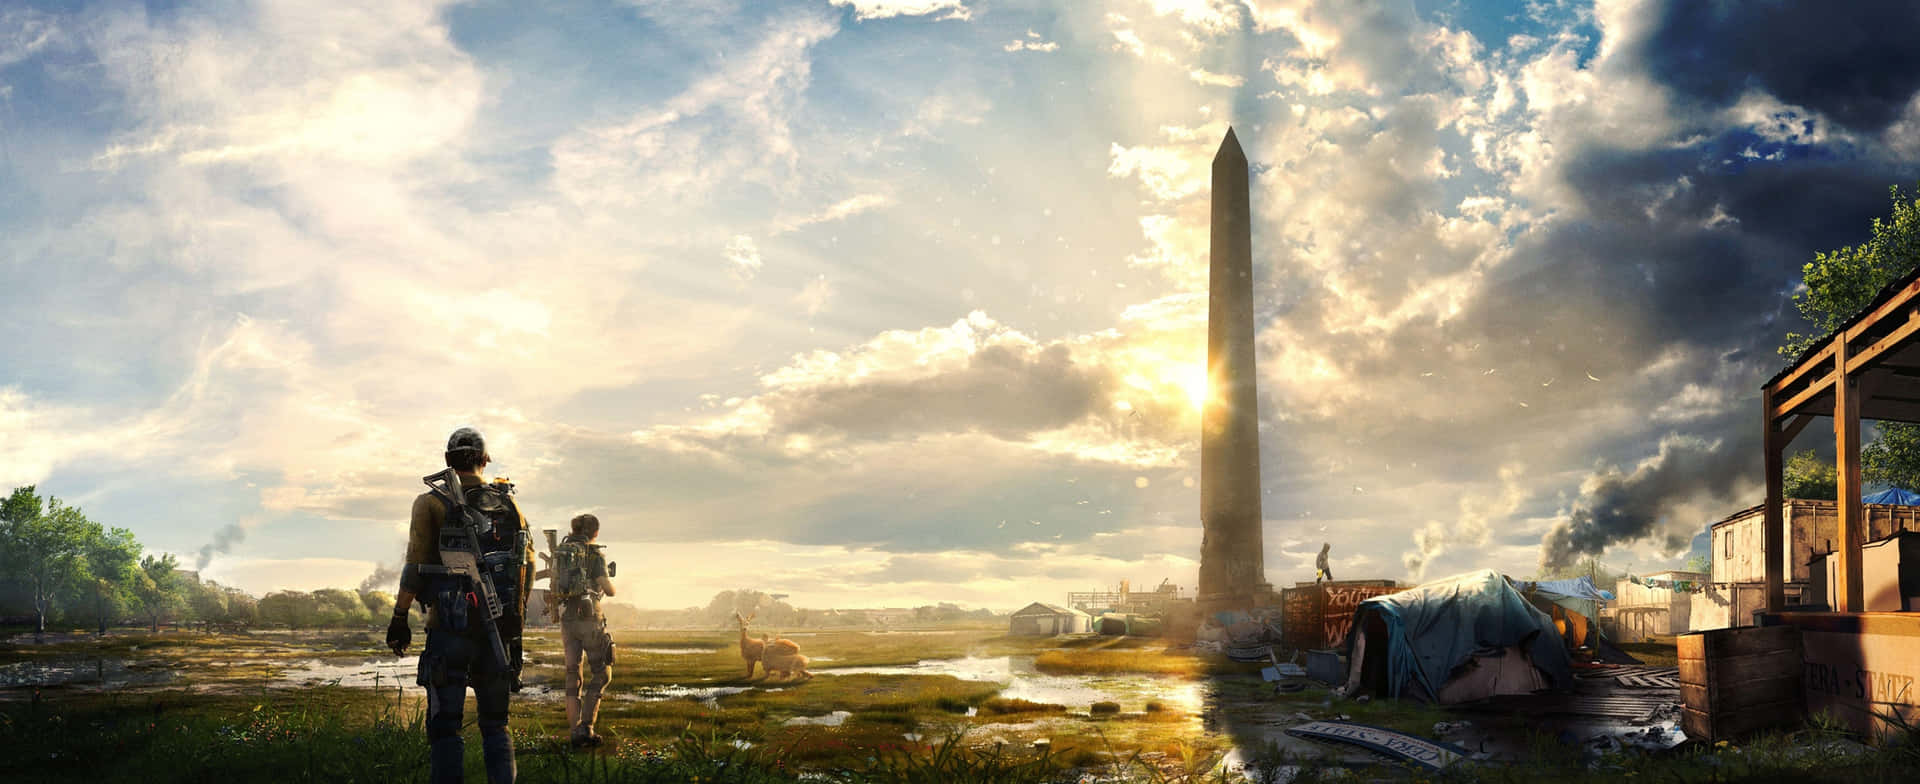 Unlock new experiences in The Division 2 with a 4K display. Wallpaper